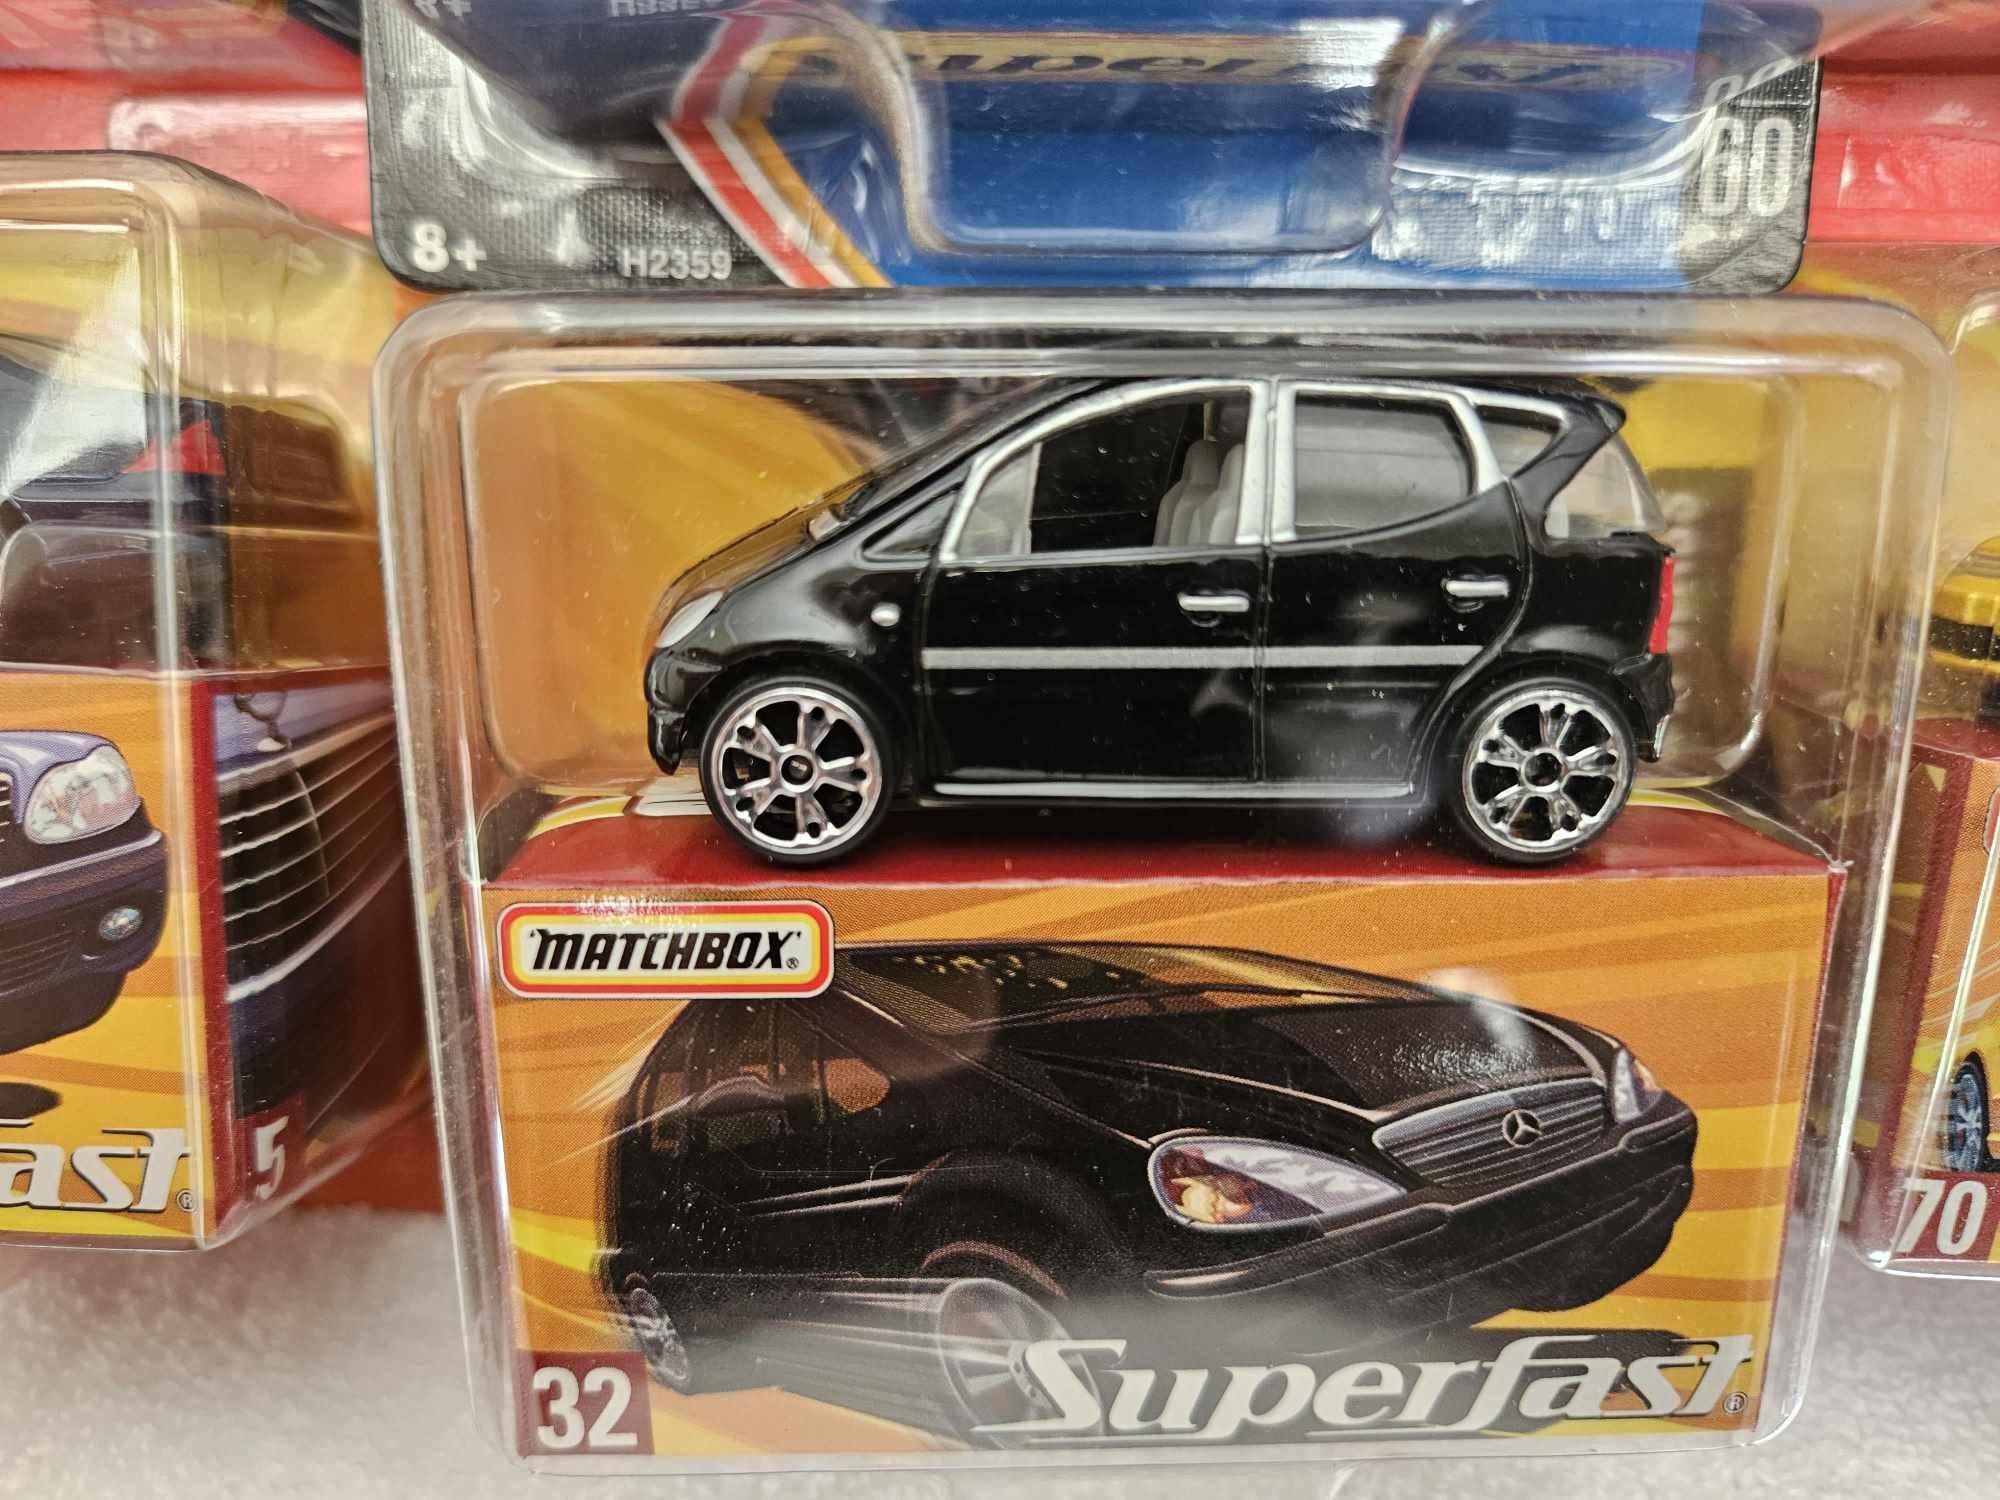 9 MATCHBOX SUPERFAST IN BLISTERPACKS WITH BOX